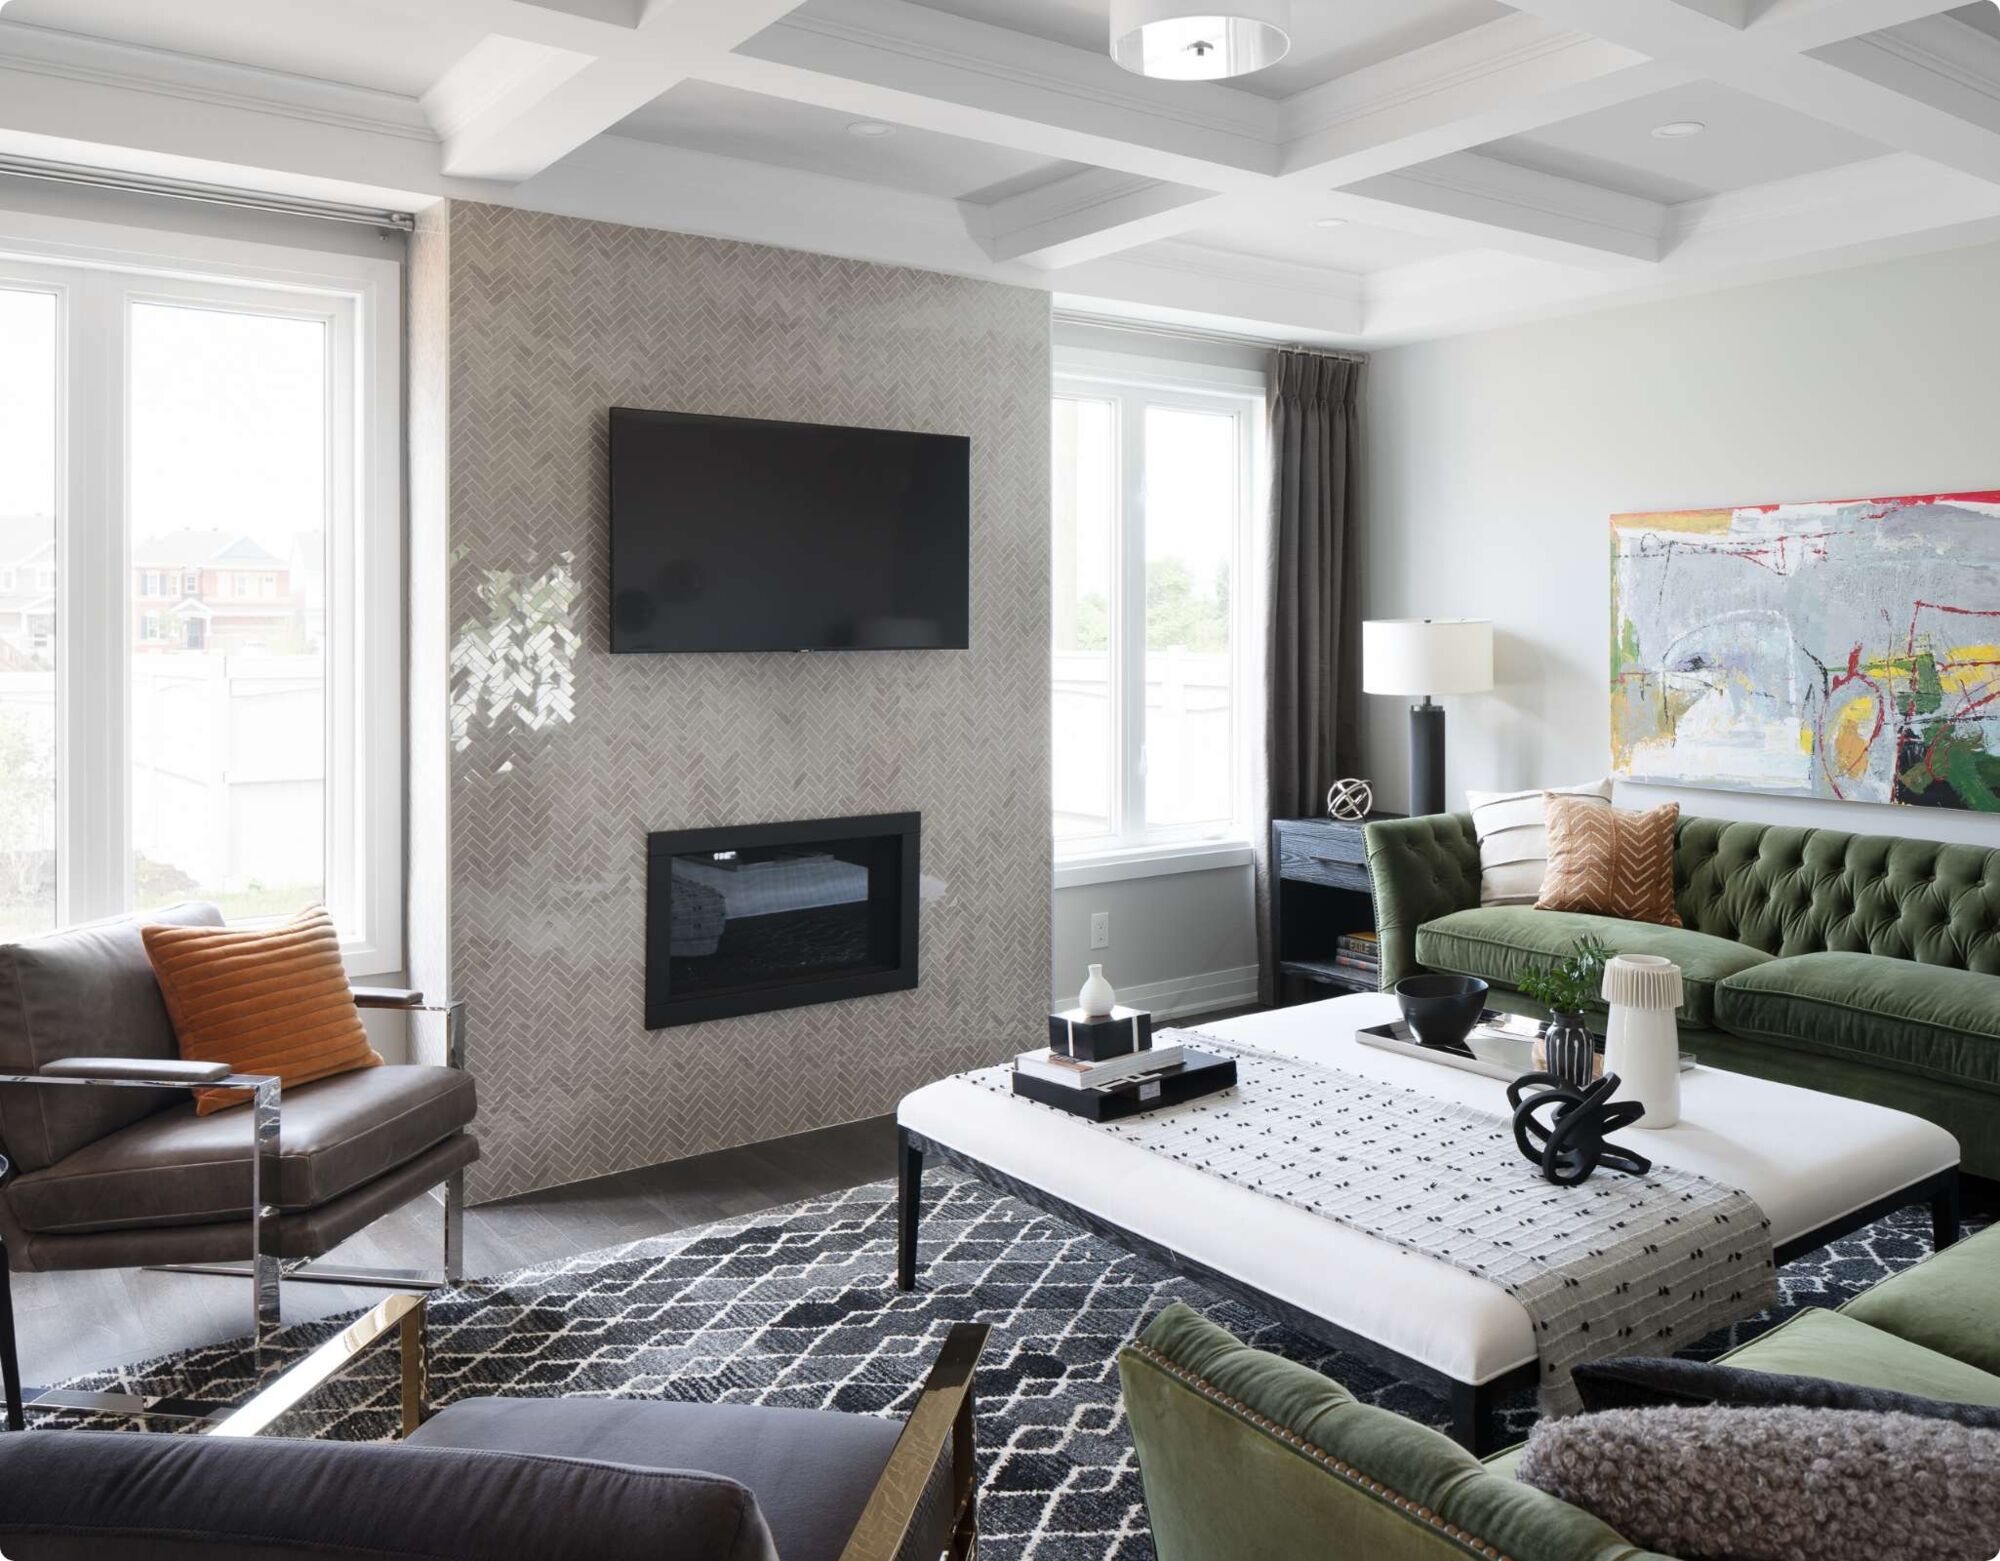 A living room with a green couch, taupe accents and a fireplace.